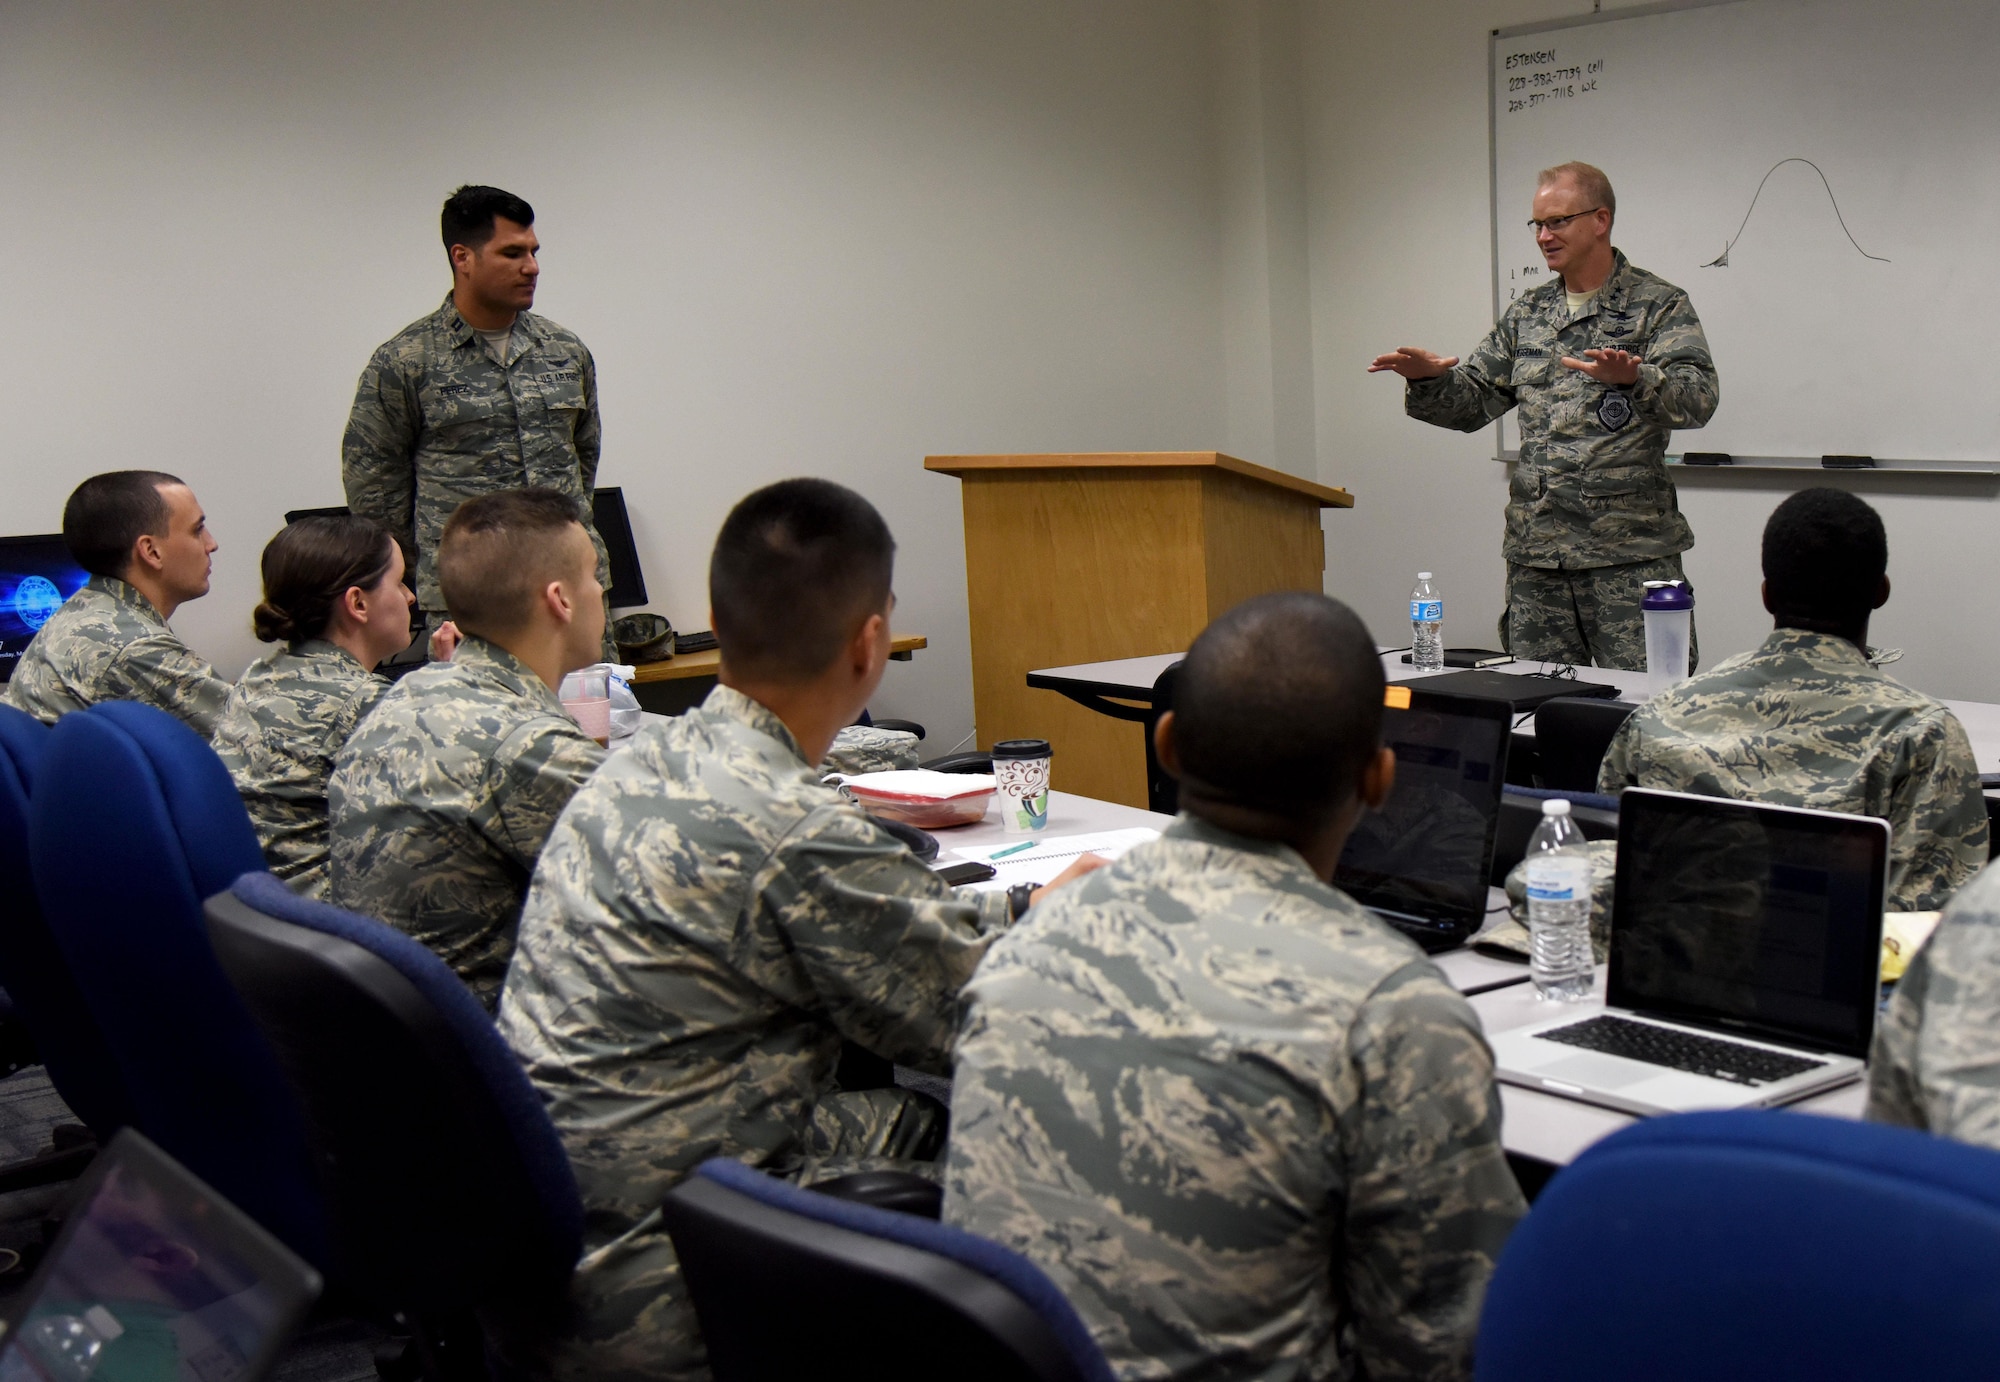 Maj. Gen. Christopher Weggeman, 24th Air Force commander, Joint Base San Antonio-Lackland, Texas, speaks to students in the 333rd Training Squadron undergraduate cyber training course at Stennis Hall during a site visit March 1, 2017, on Keesler Air Force Base, Miss. Weggeman visited with Airmen linked to the cyber curriculum and received an 85th Engineering Installation Squadron mission brief. (U.S. Air Force photo by Kemberly Groue)